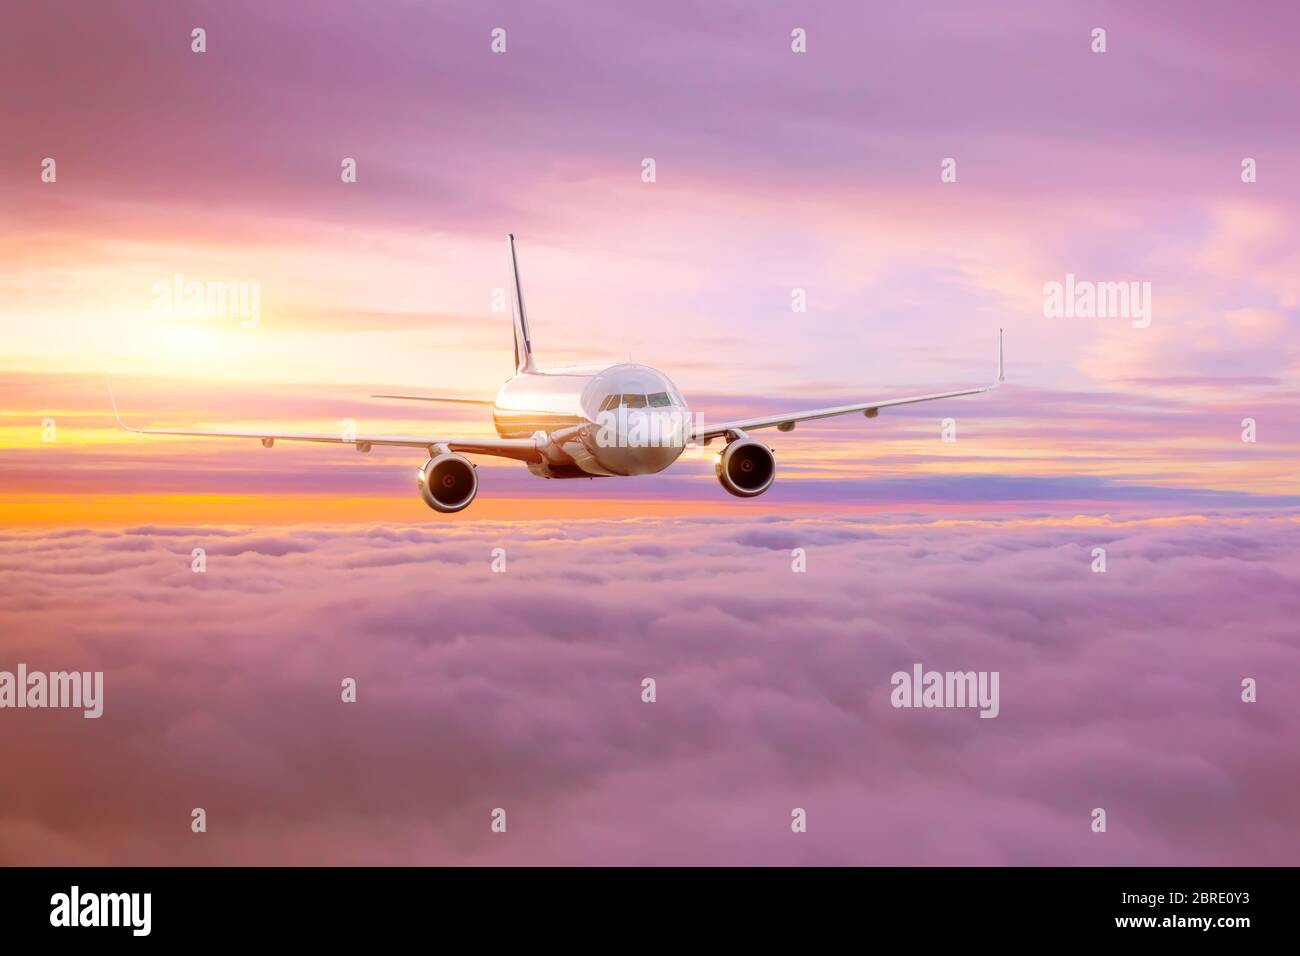 Passenger airplane in the morning sun flies high above the pink-tinted clouds with glare on the fuselage Stock Photo